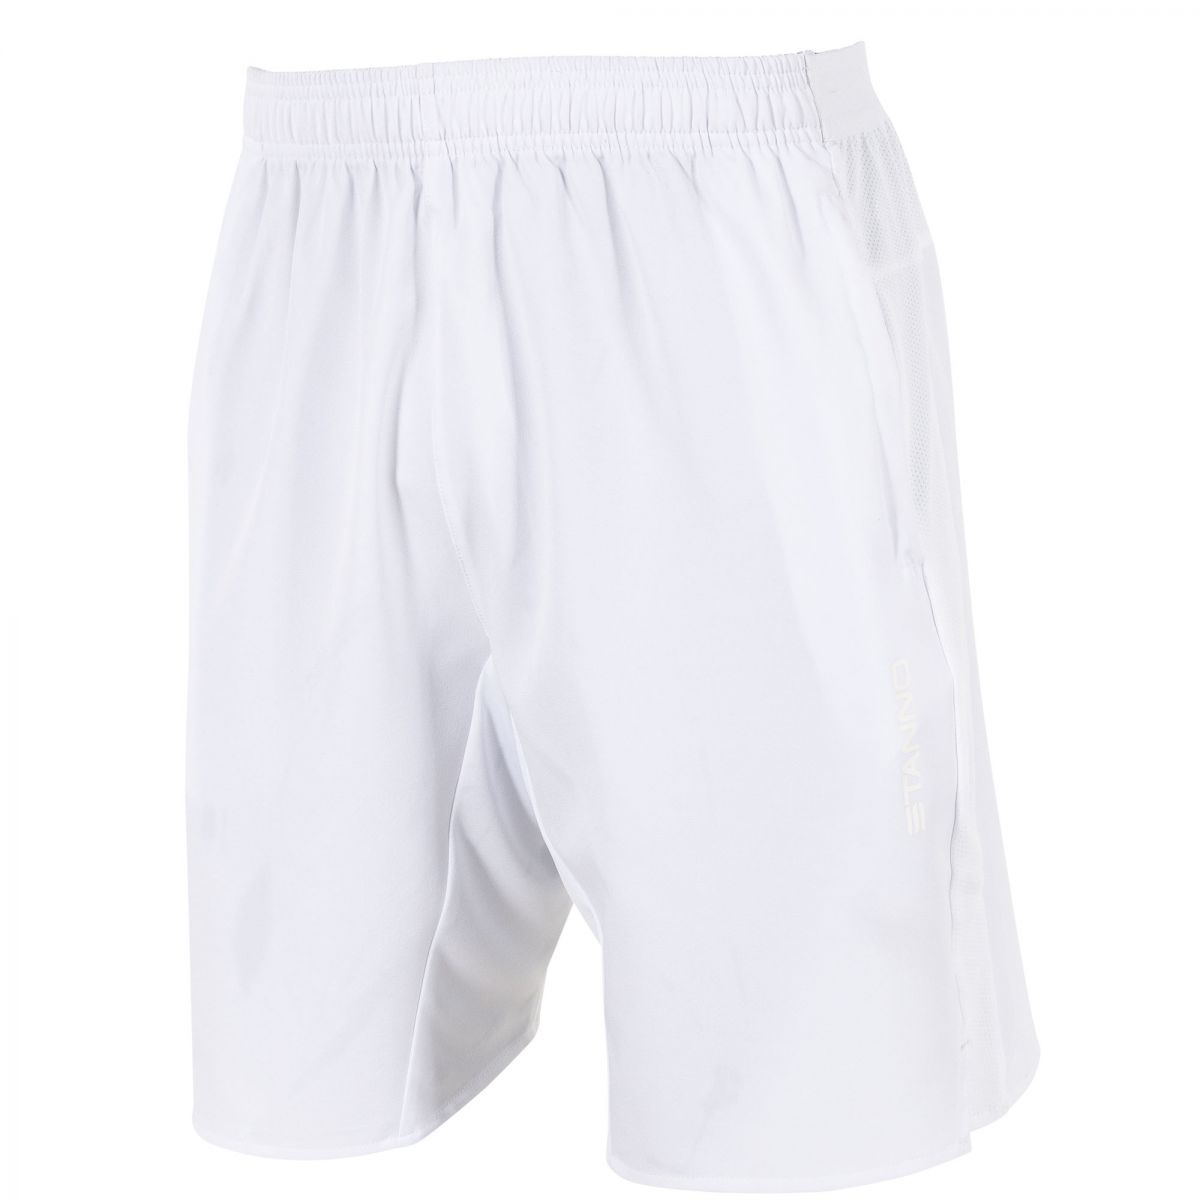 Shop & Support Stanno Functionals Woven Short Unisex